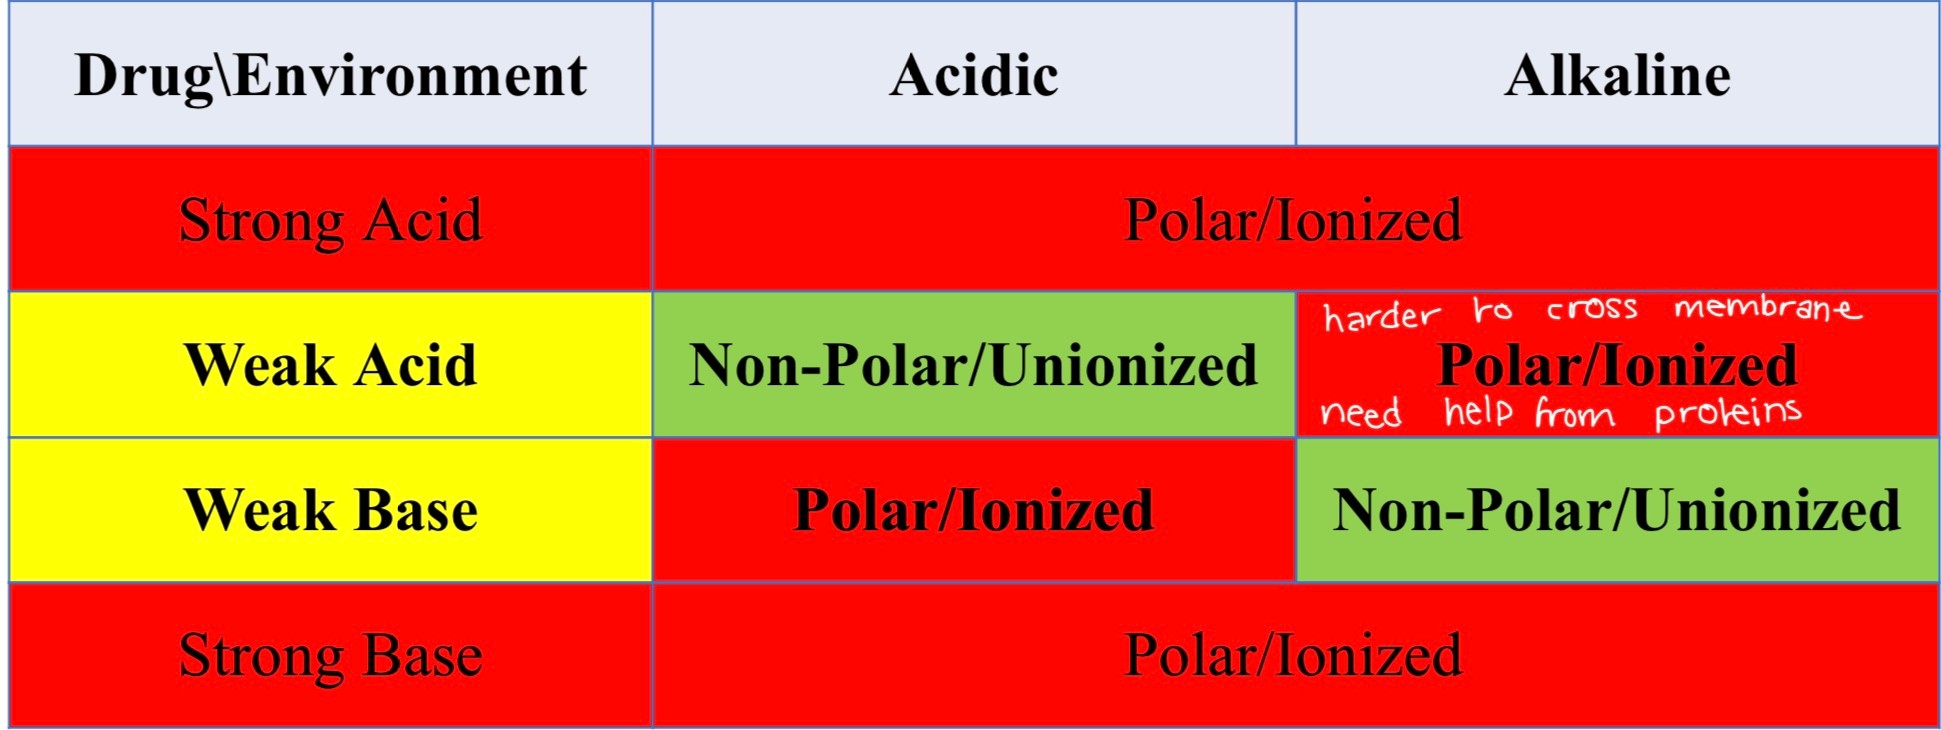 <p>ionization depends on pH of their environment</p><p>weak bases ionized in acidic environment</p><p>weak acids ionized in alkaline environments</p><p></p><p>remember pH affect absorption</p>